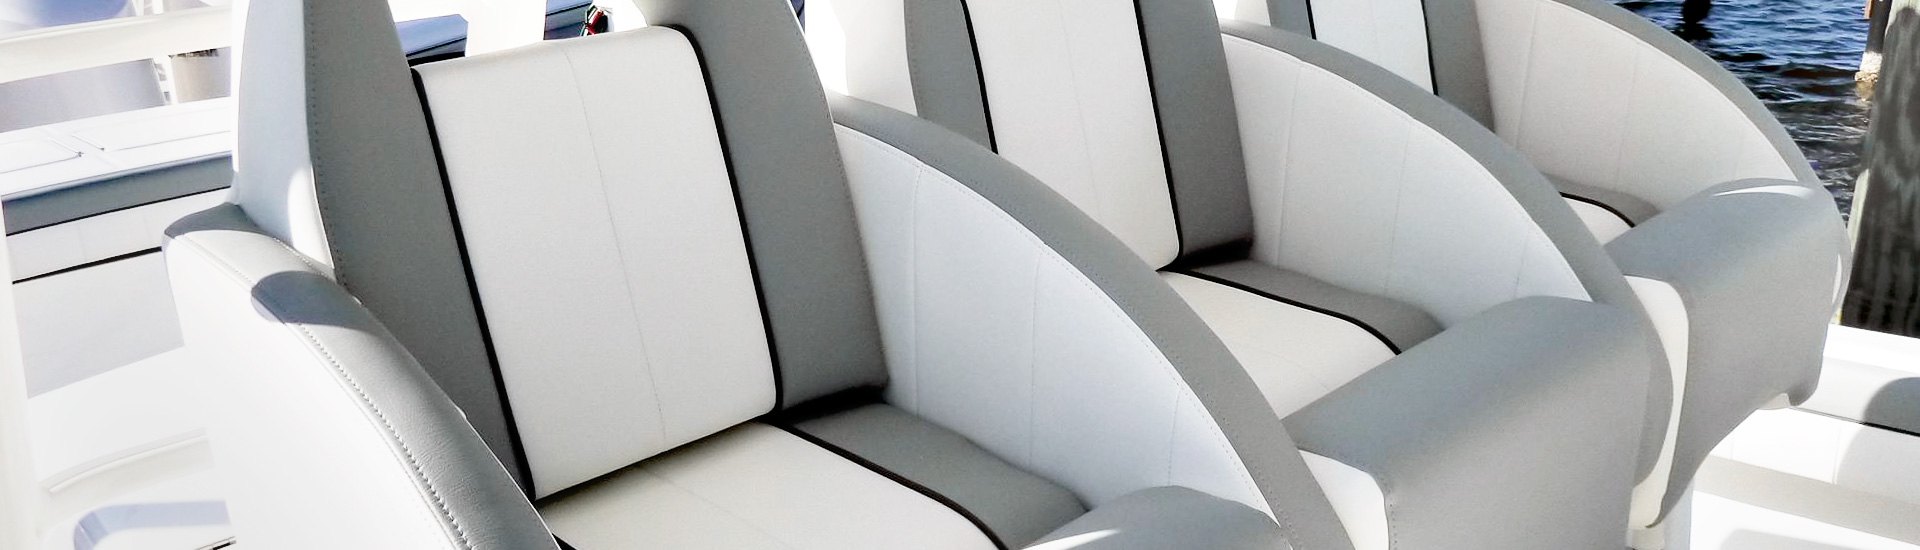 https://ic.boatid.com/boating-marine/pages/boat-seating-accessories/boat-seating-accessories_big_0.jpg